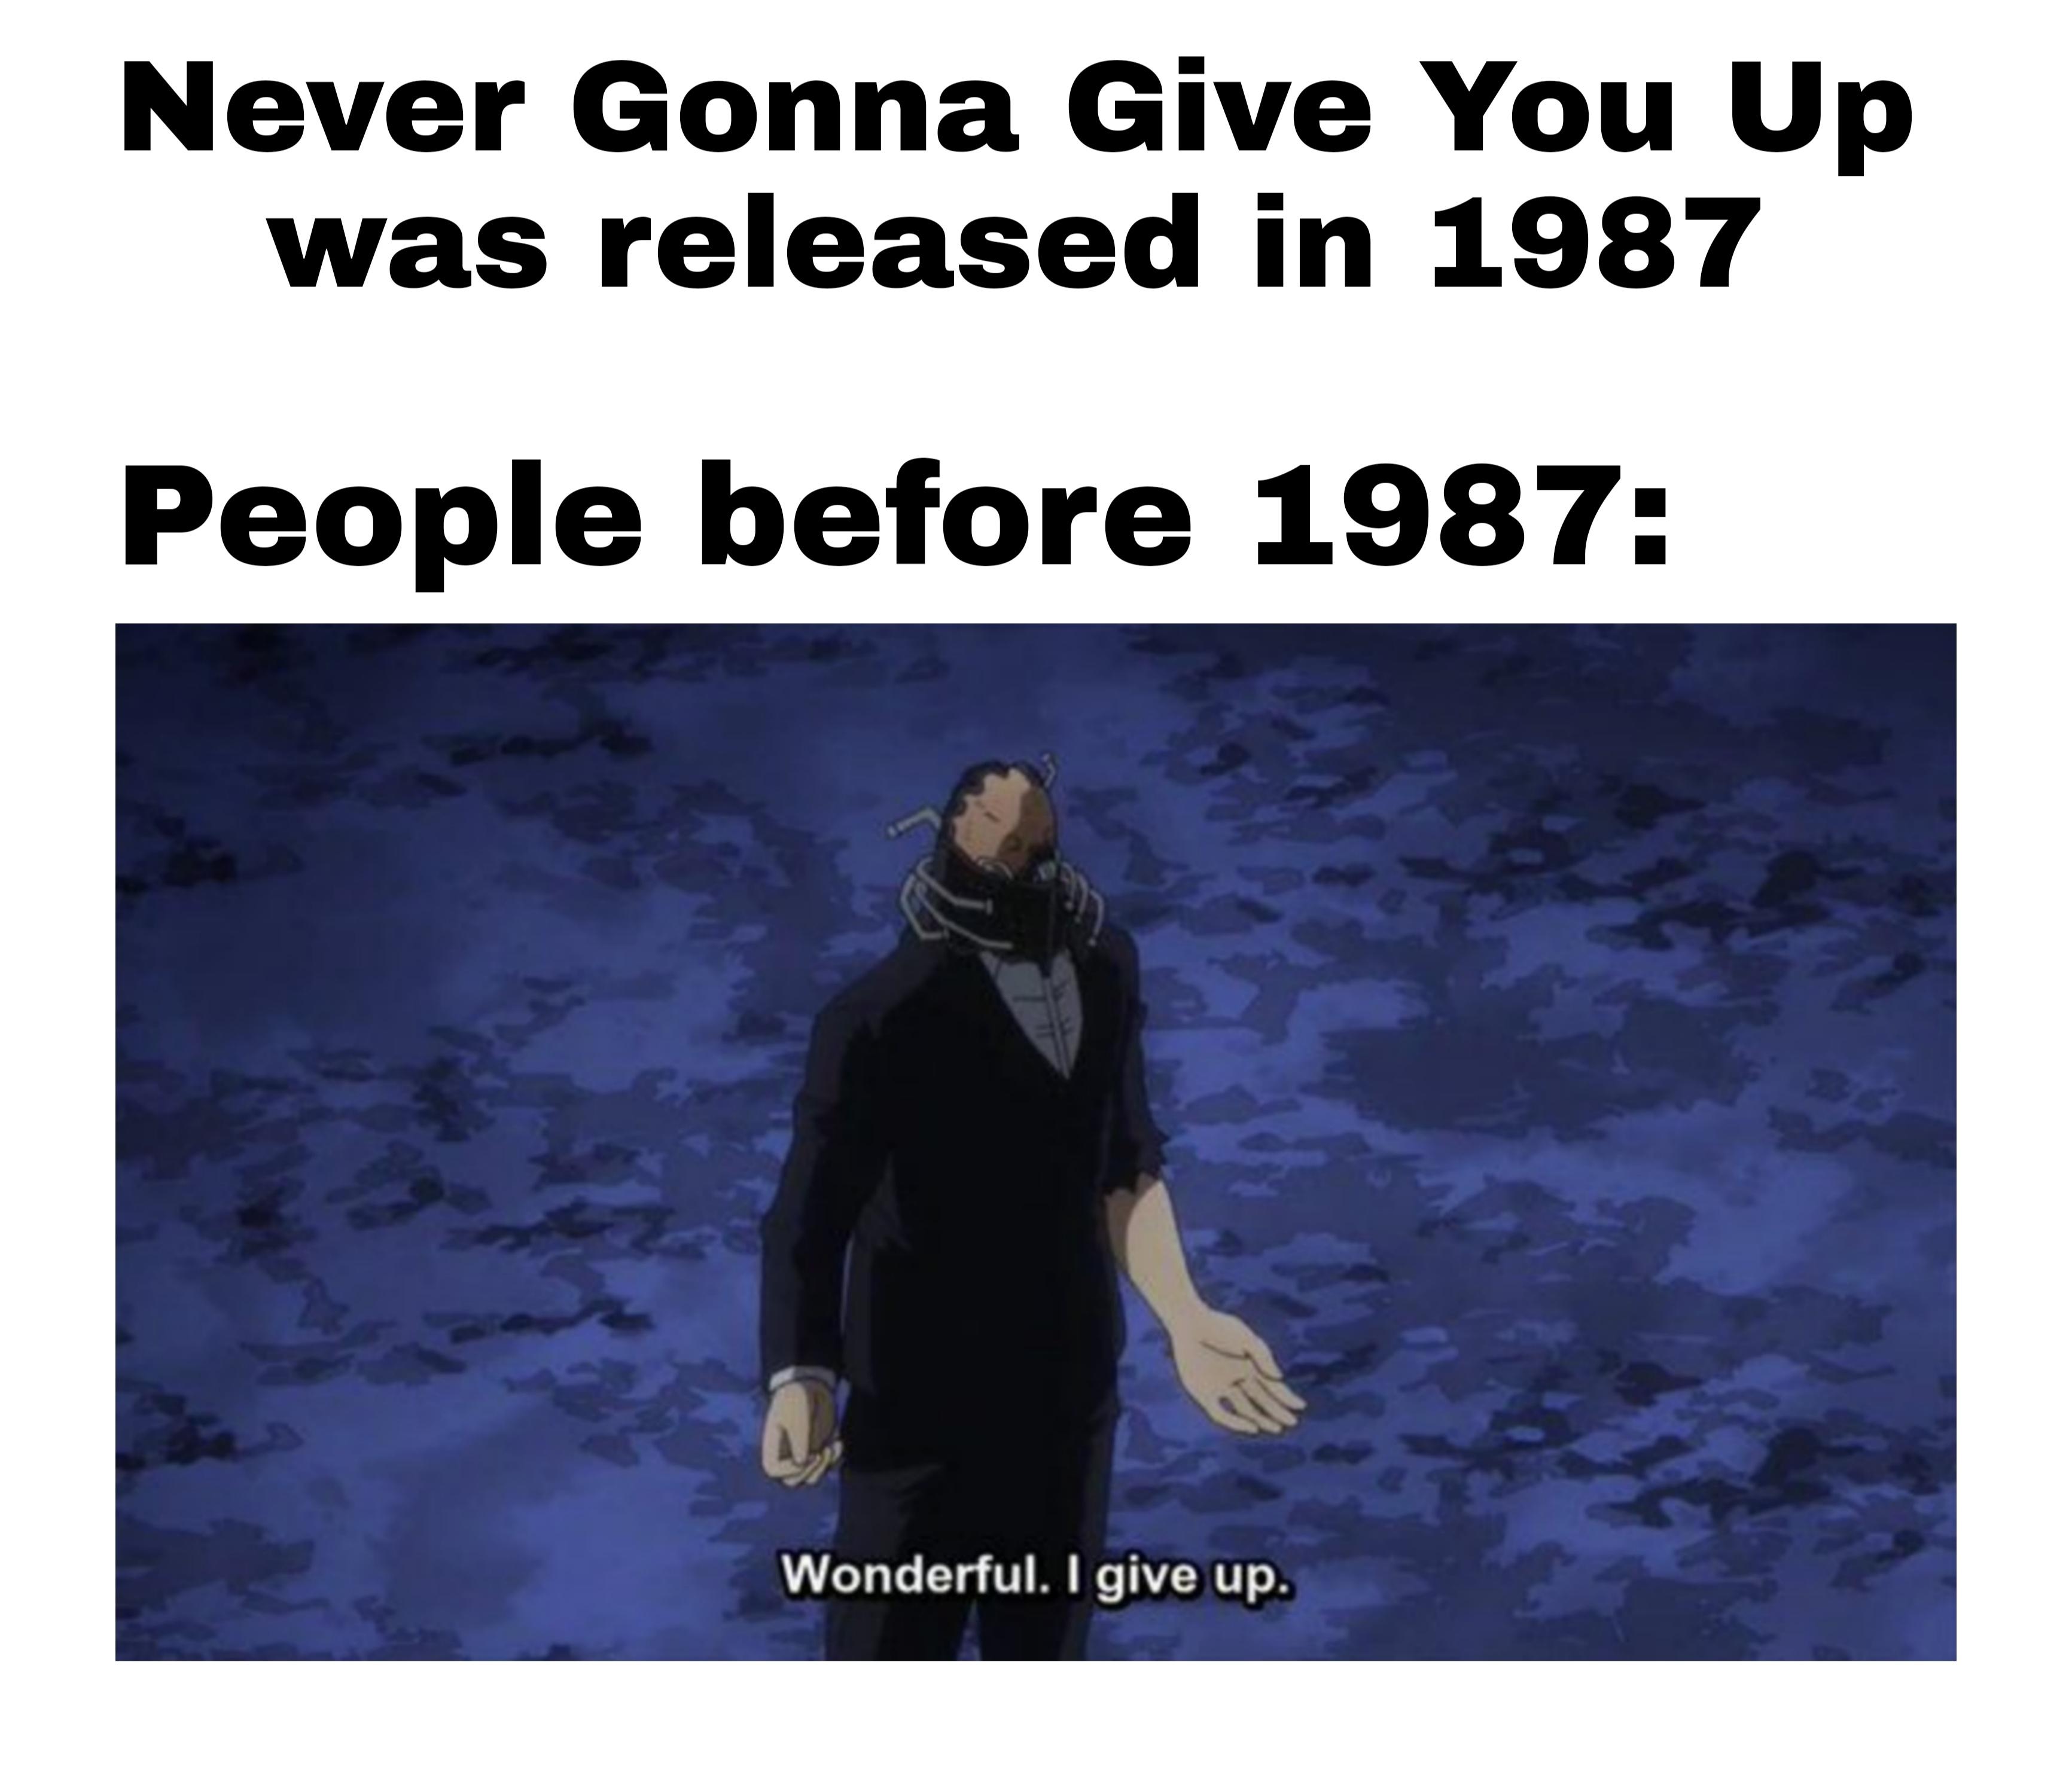 fresh memes - Never Gonna Give You Up U was released in 1987 People before 1987 23 Wonderful. I give up.